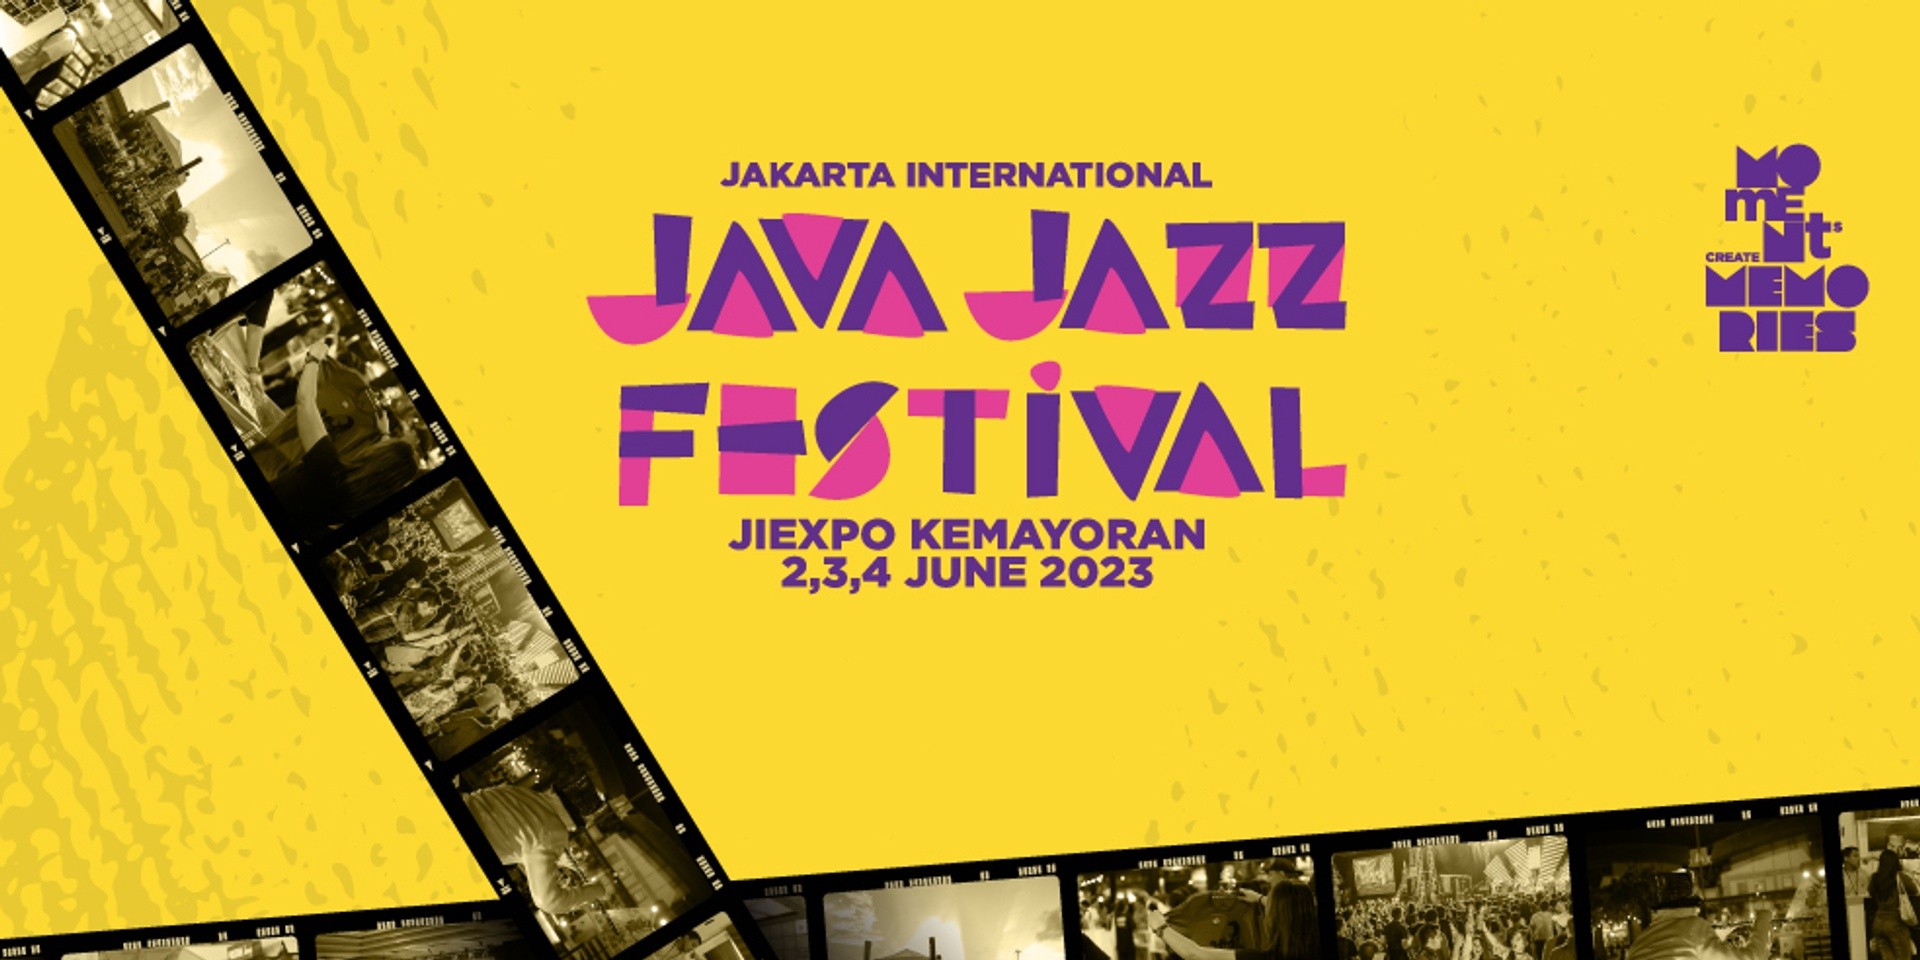 Java Jazz Festival 2023 to return in June with performances by The Chicago Experience, Cory Wong, Ginger Root, and more